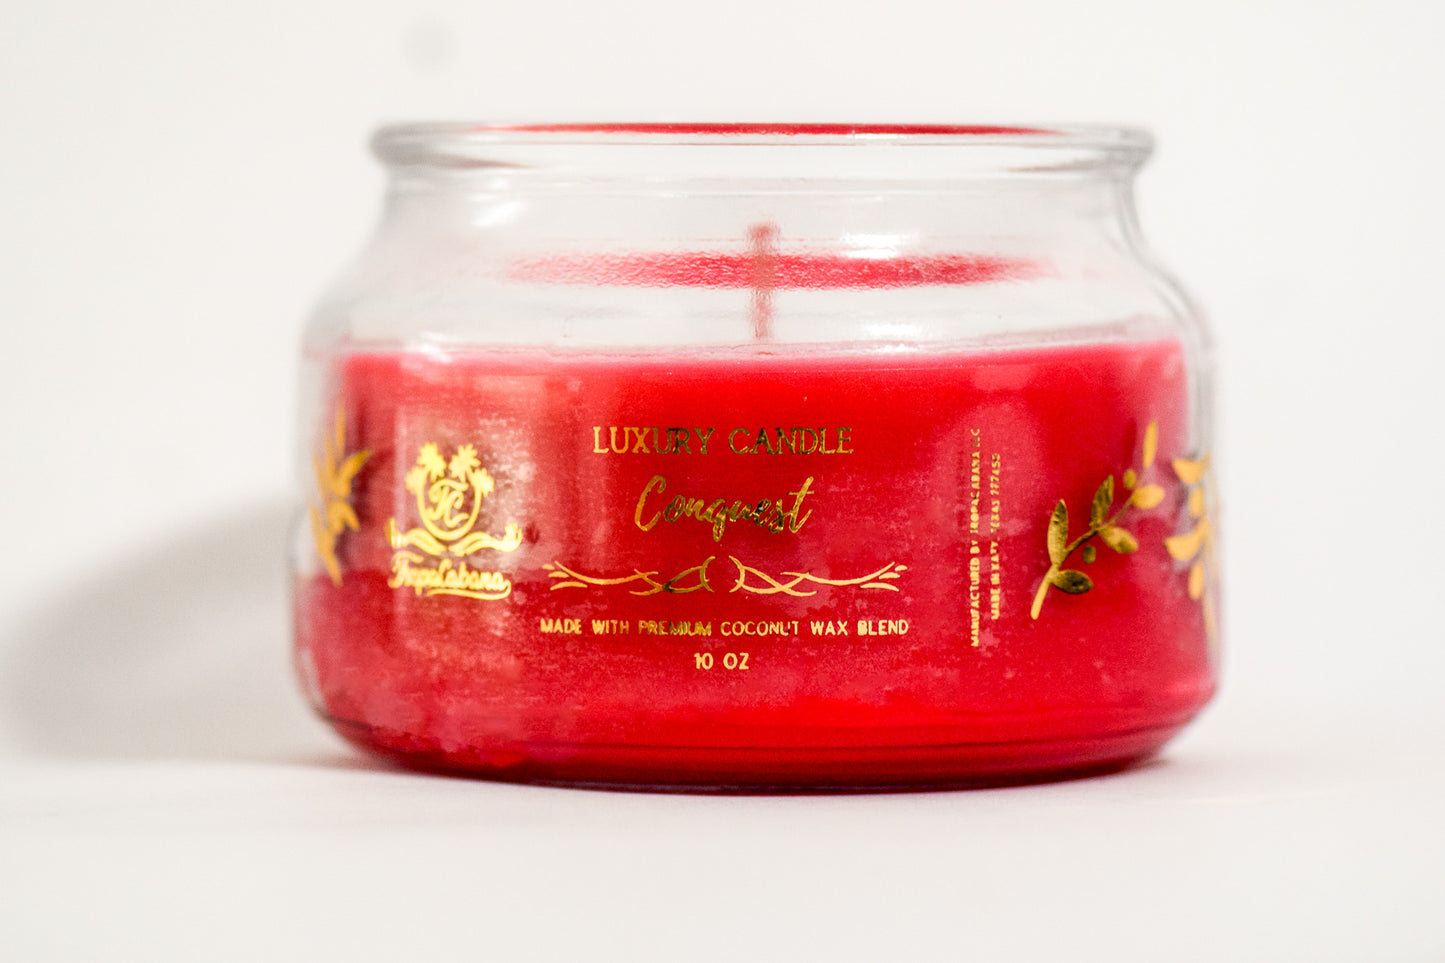 TropaCabana, 10 oz Conquest Candle, Floral and spicy fragrance, red color, luxury candle, vegan candle, coconut wax candle, handmade, handpoured, unisex, gifts for her, gifts for him, anniversary, valentine's, birthday, romantic, sophisticated aroma.